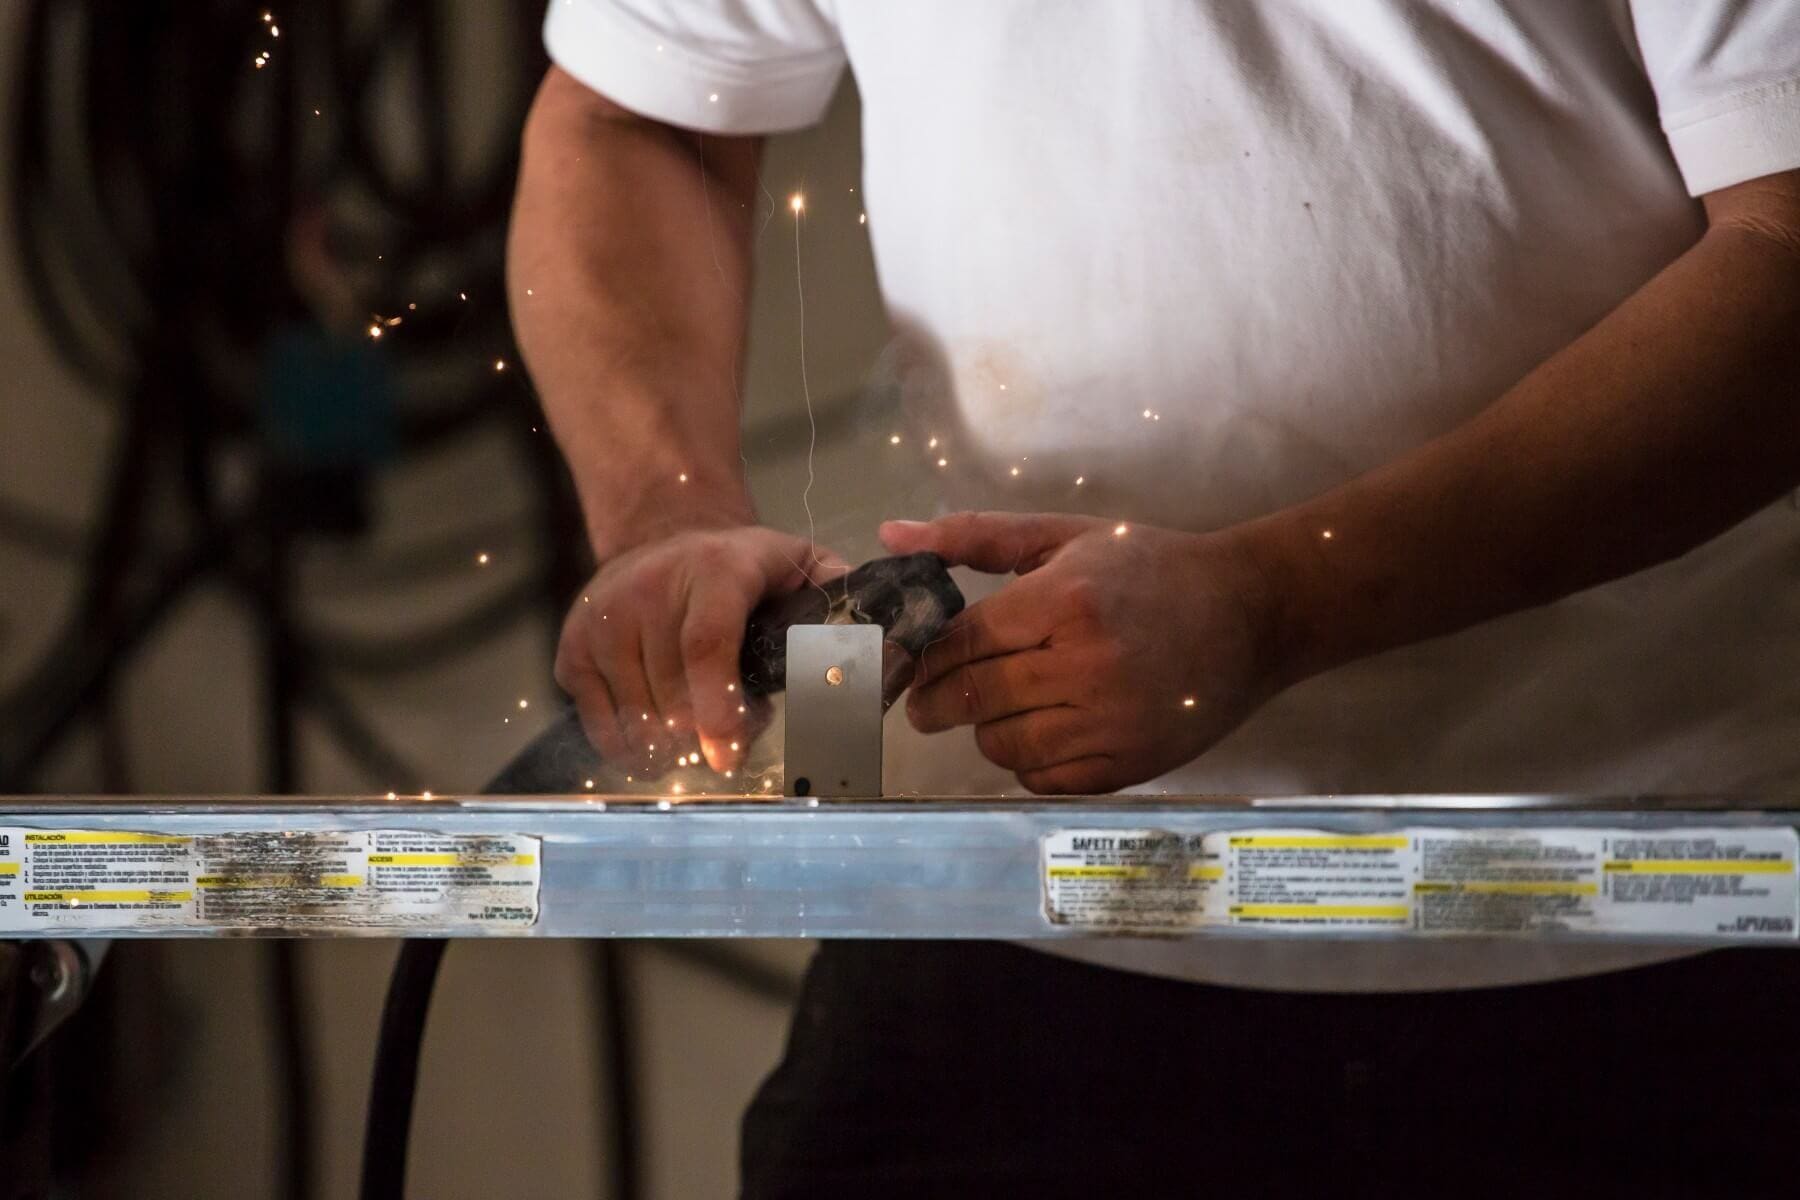 A person using an angle grinder on metal.